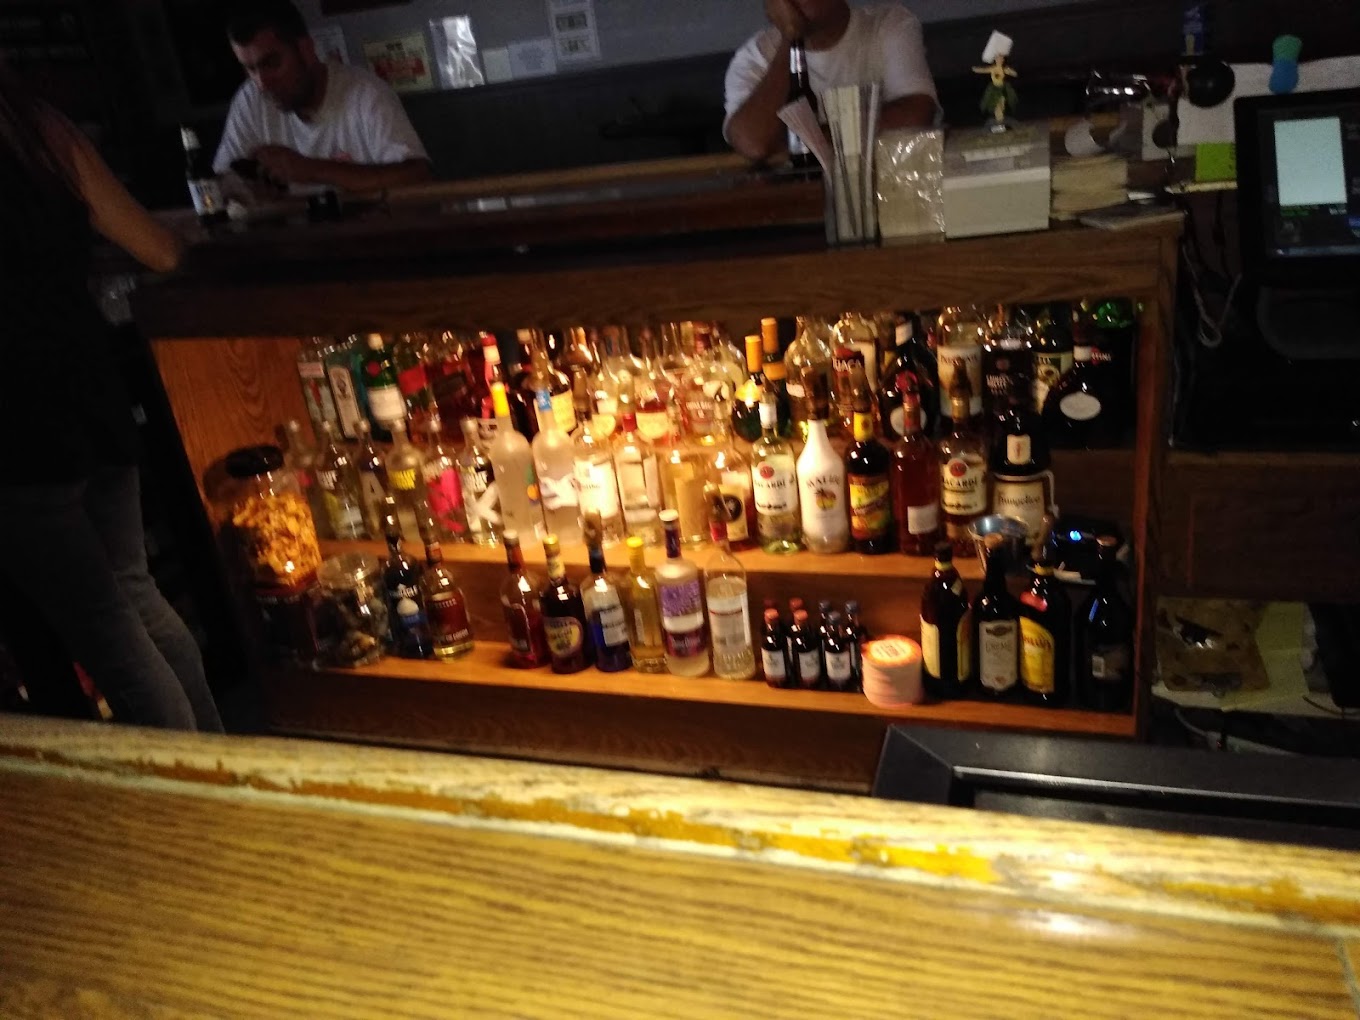 hard liquer collection within the bar interior